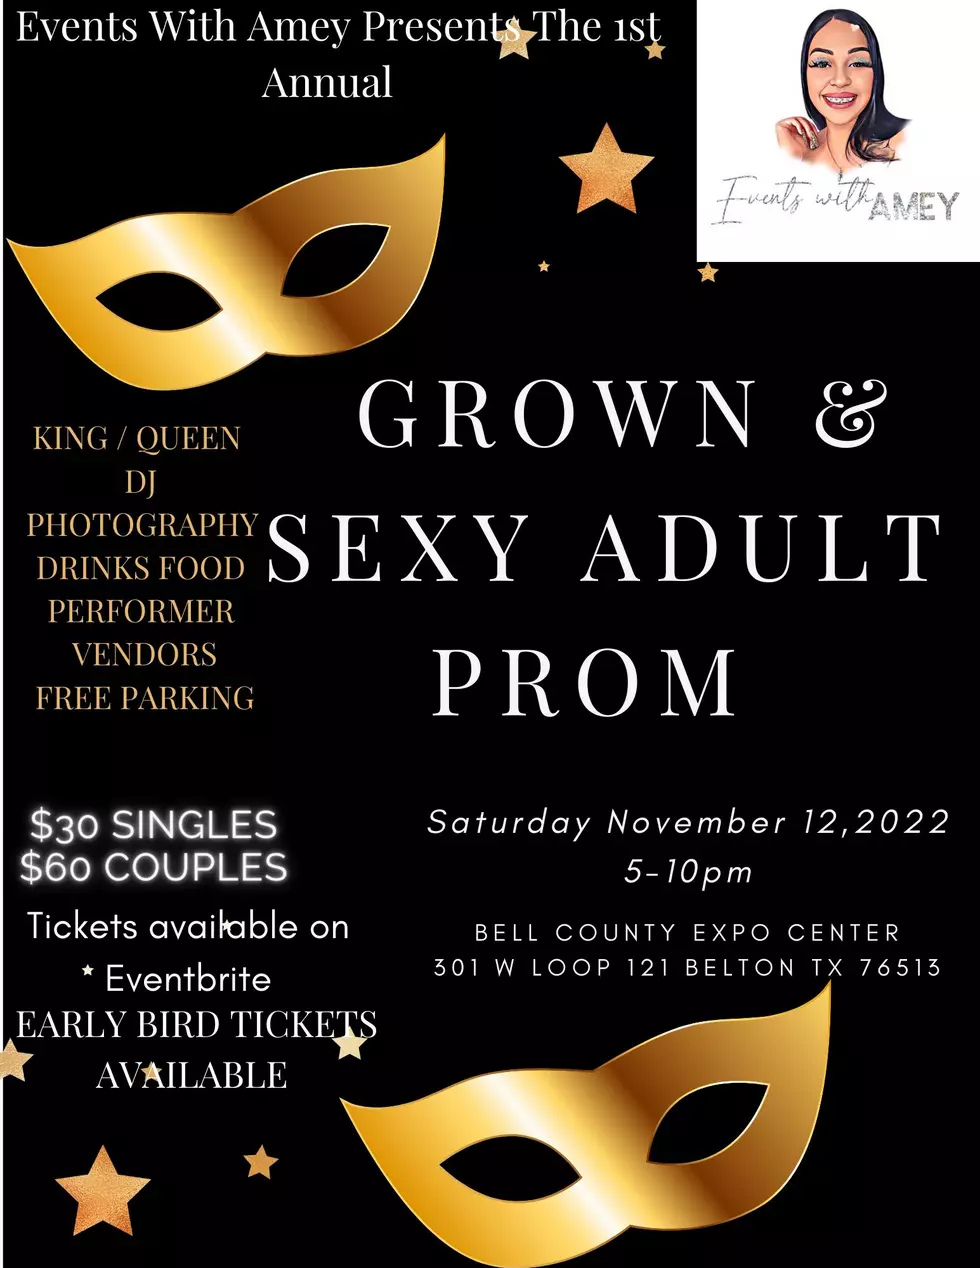 Dress to Impress For The Grown And Sexy Prom In Belton, Texas